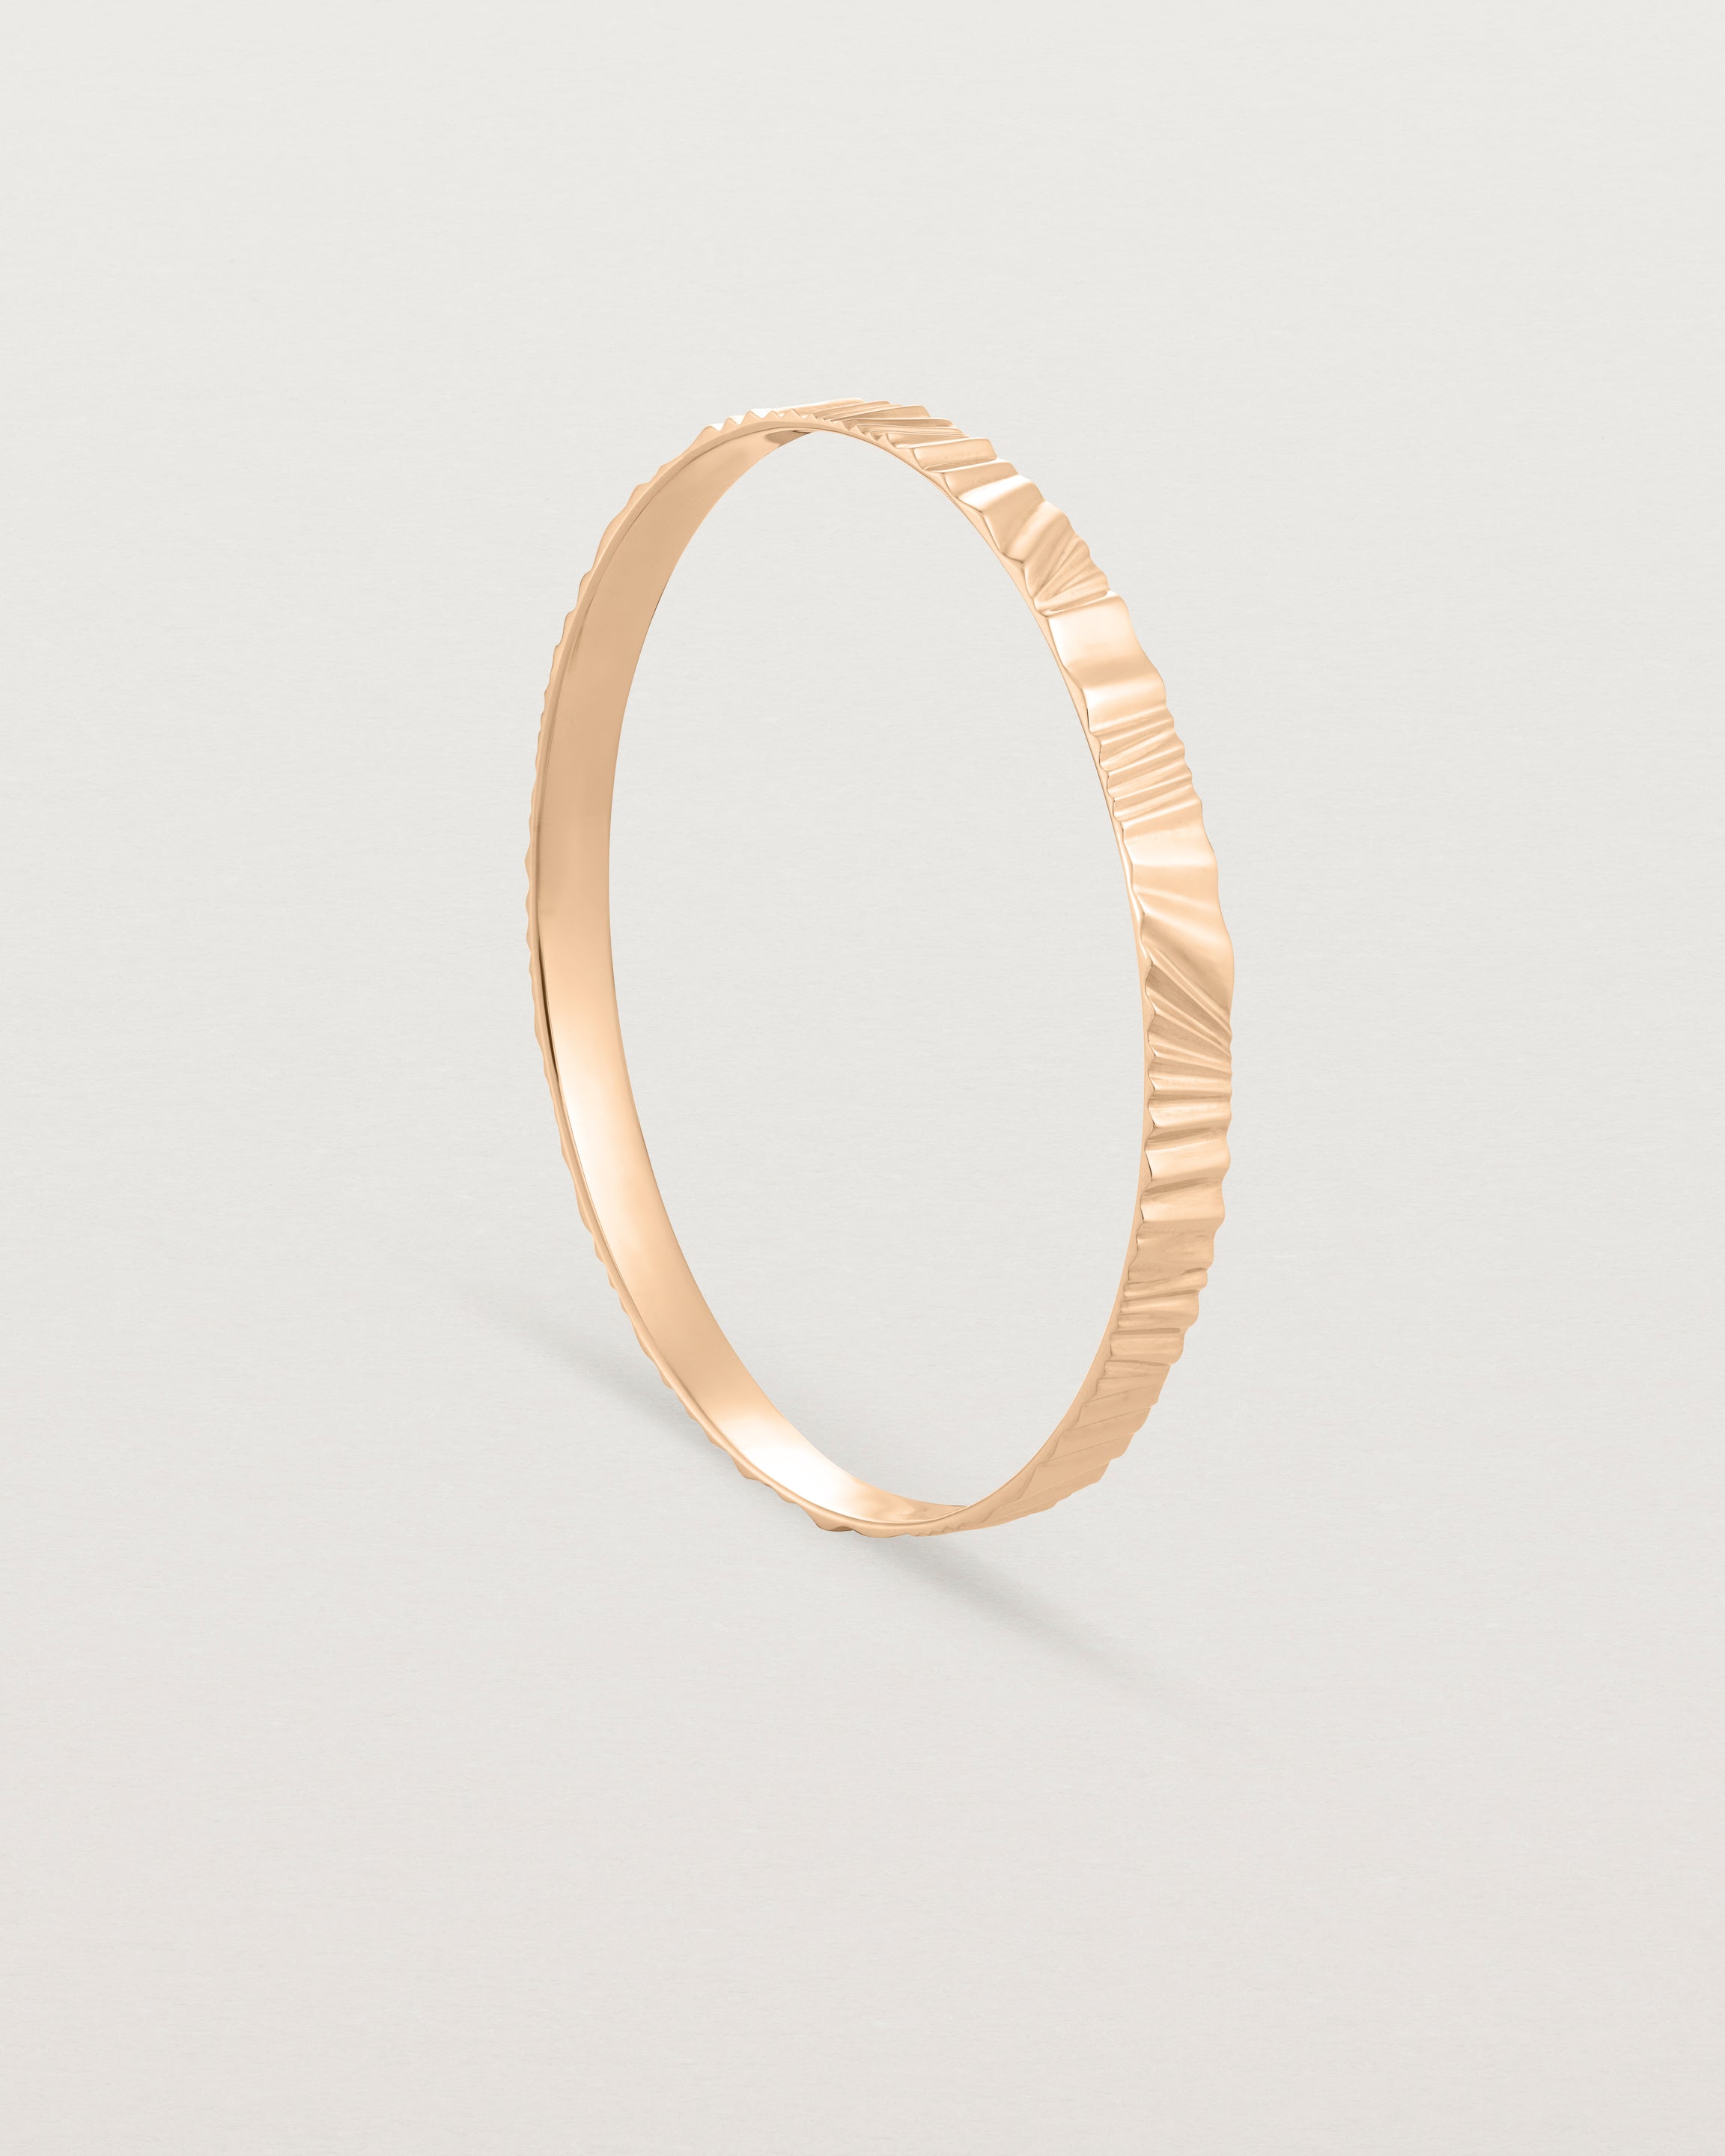 Standing view of the Pan Bangle in rose gold.